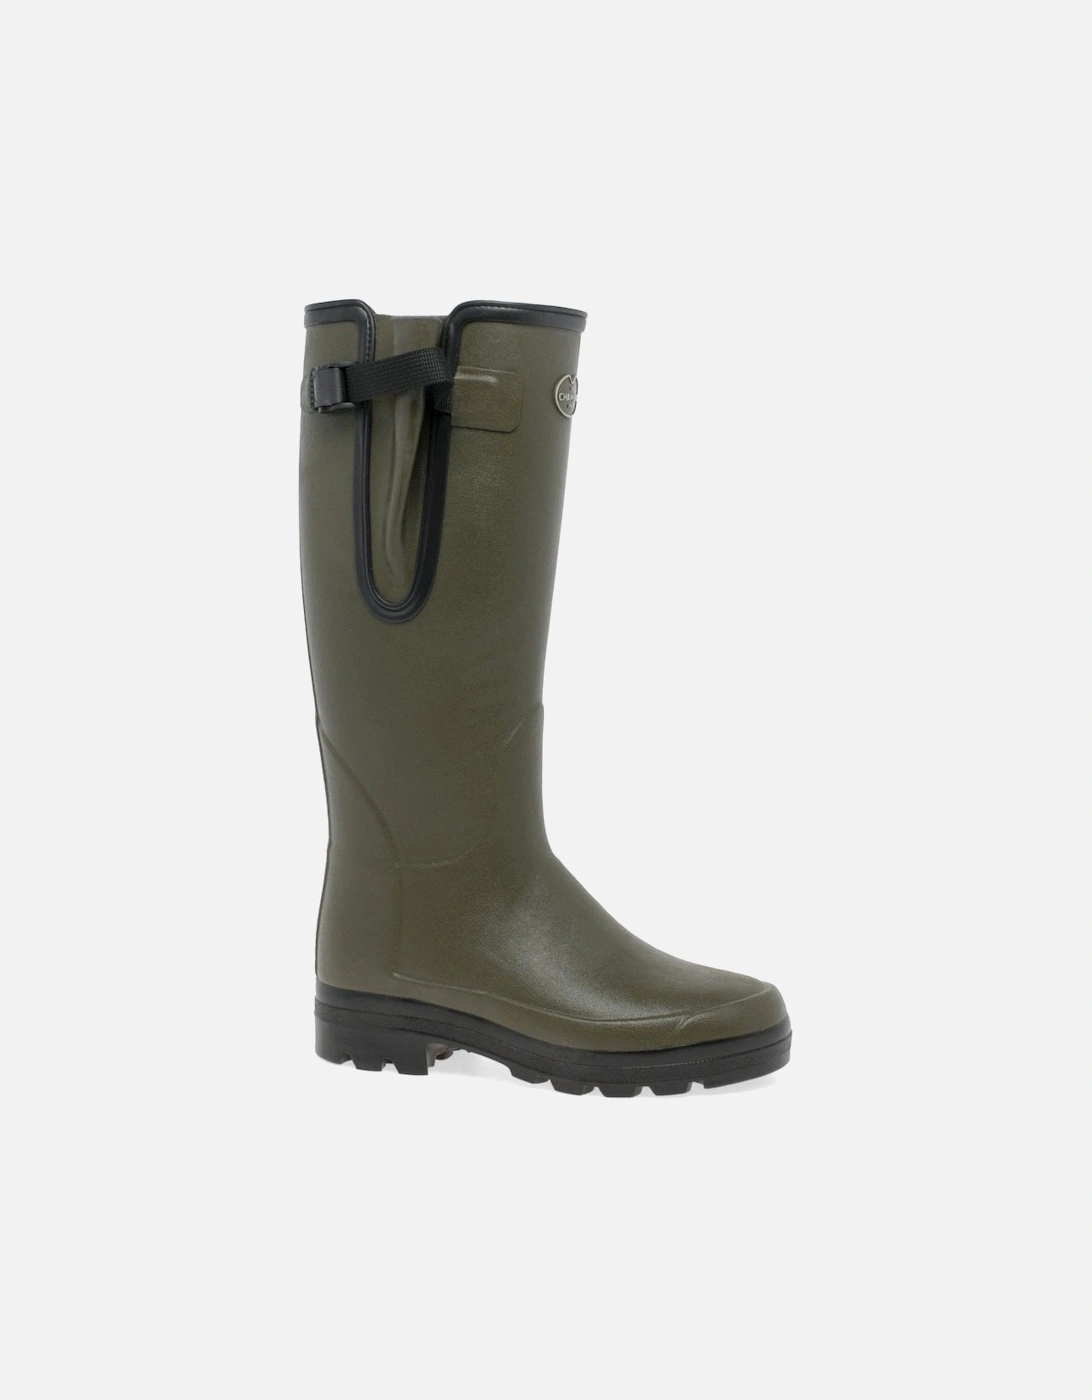 Vierzonord Mens Wellingtons, 8 of 7